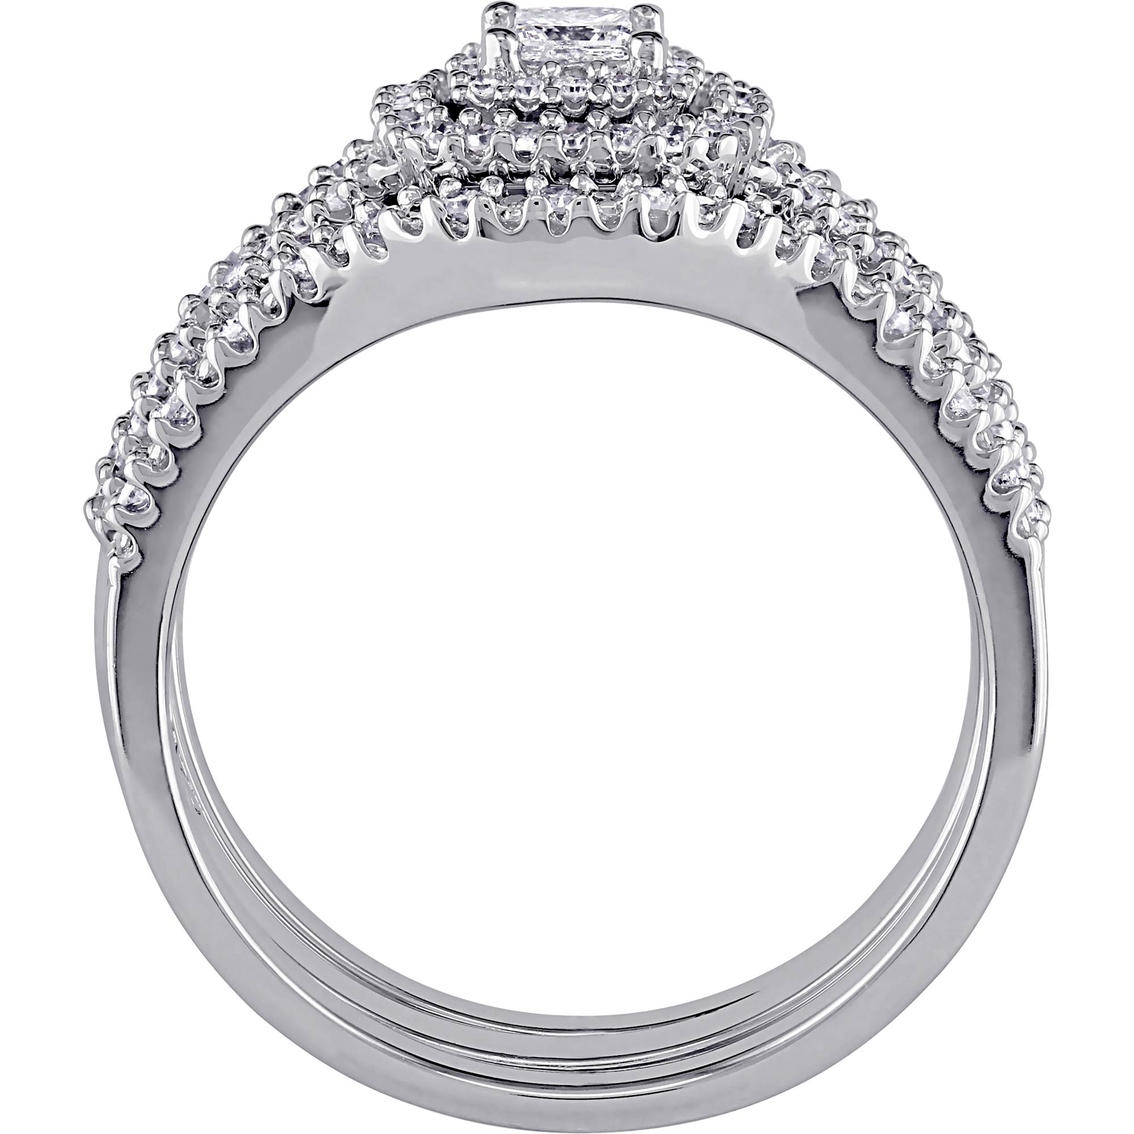 Diamore 1/2 CTW Diamond Halo 3 pc. Bridal Set in Sterling Silver - Image 3 of 4